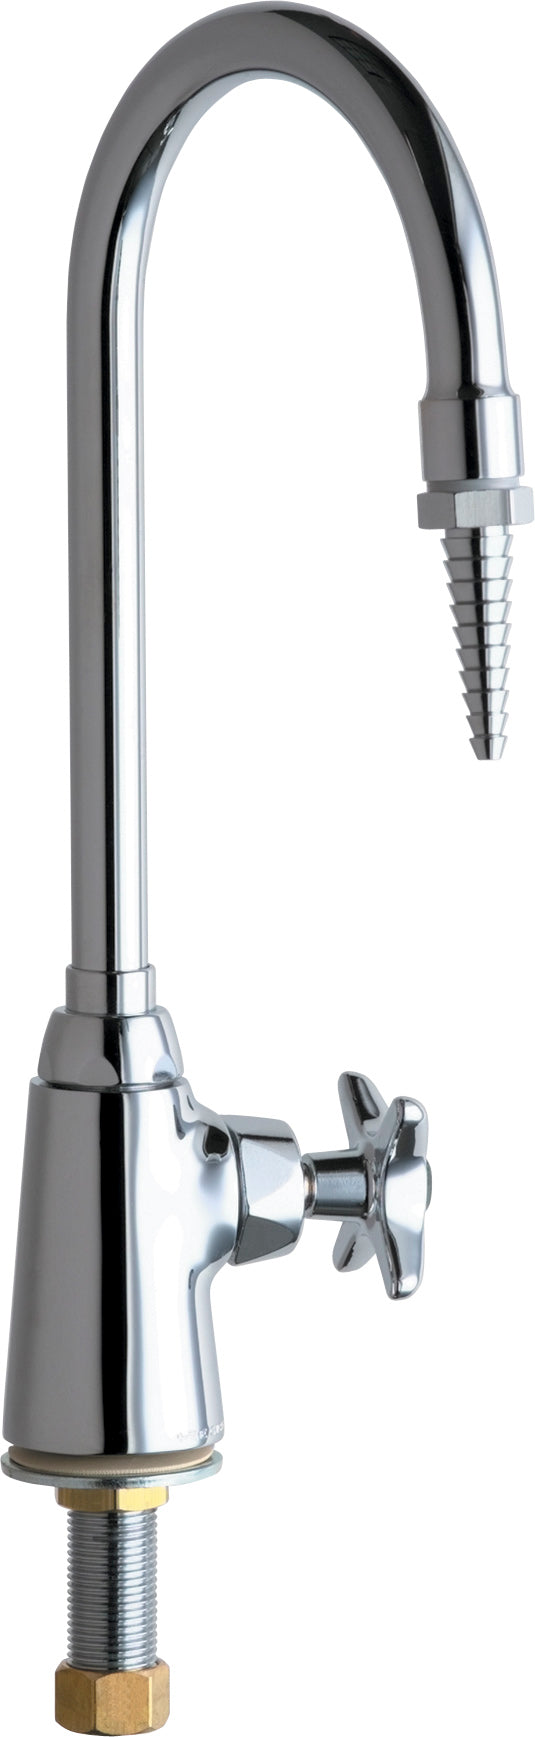 Chicago Faucets Laboratory Sink Faucet 927-XKCP